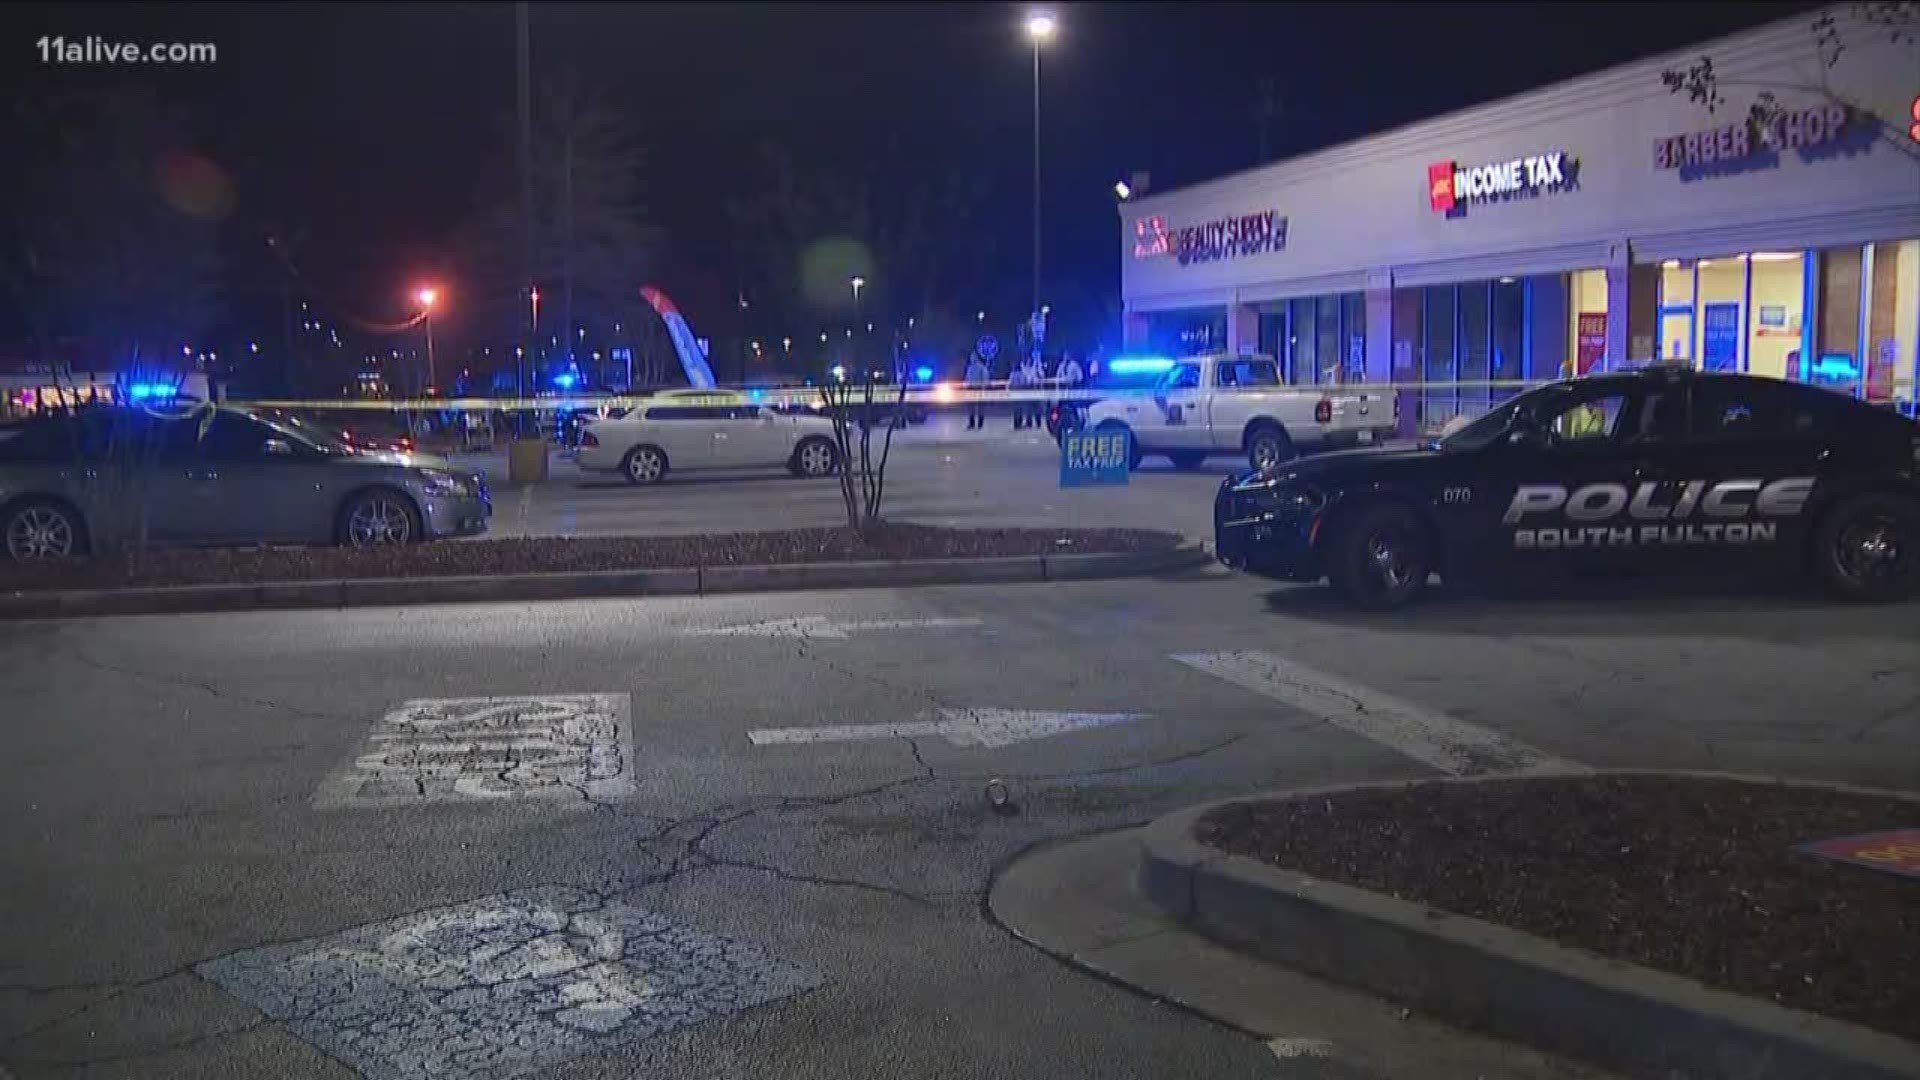 The victim was leaving a nearby barbershop when he was shot, police said.